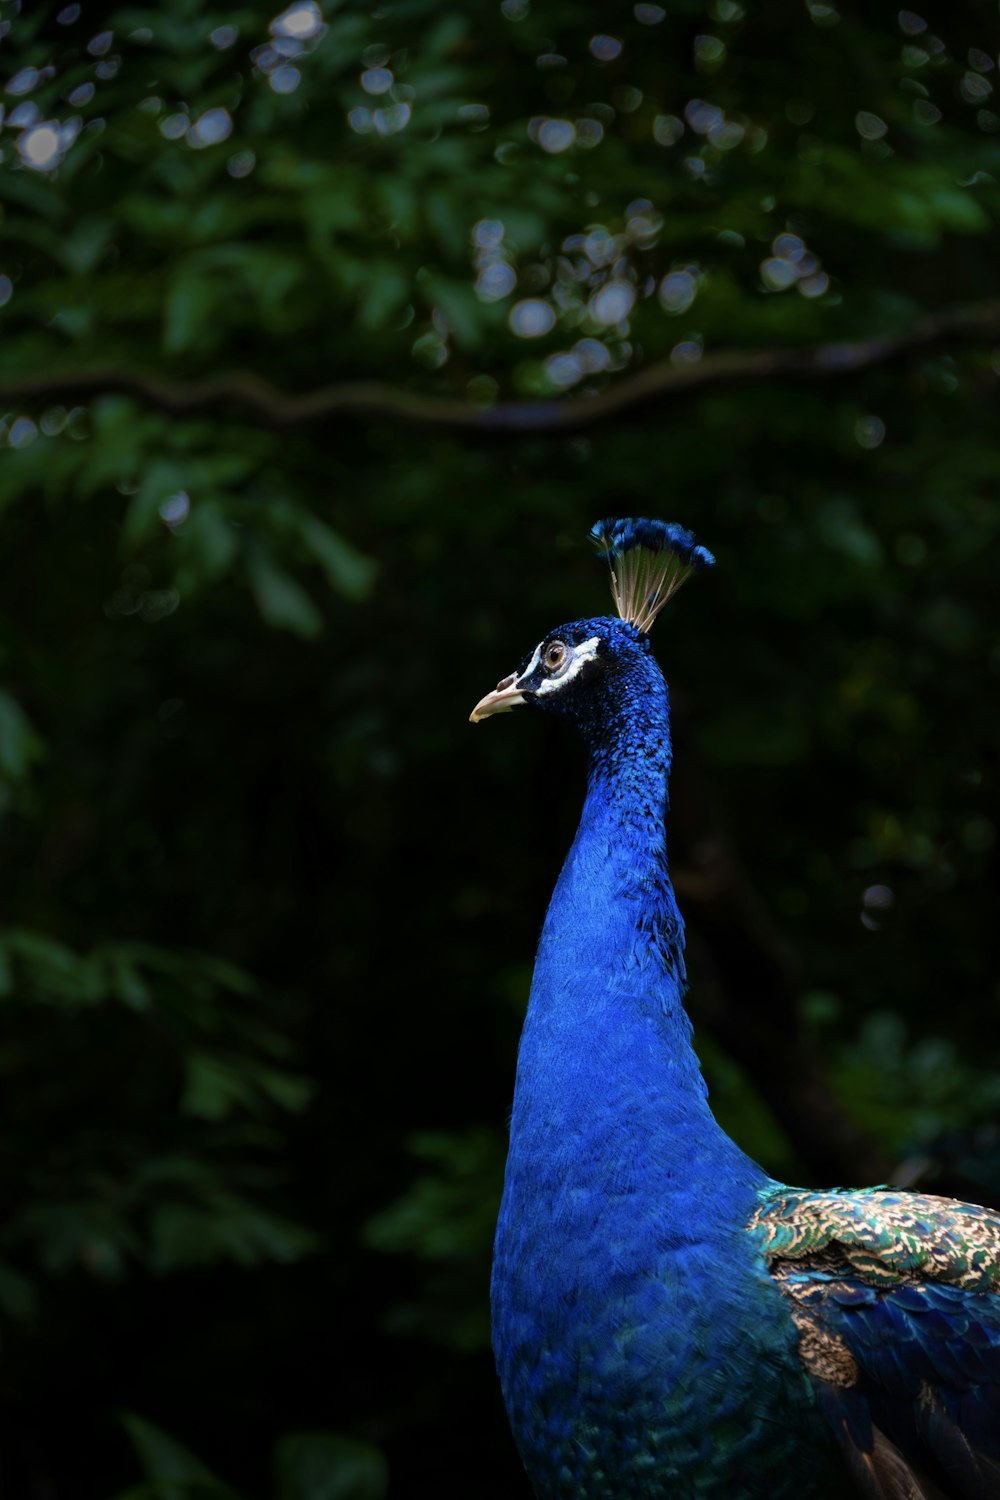 a blue peacock standing in front of a tree